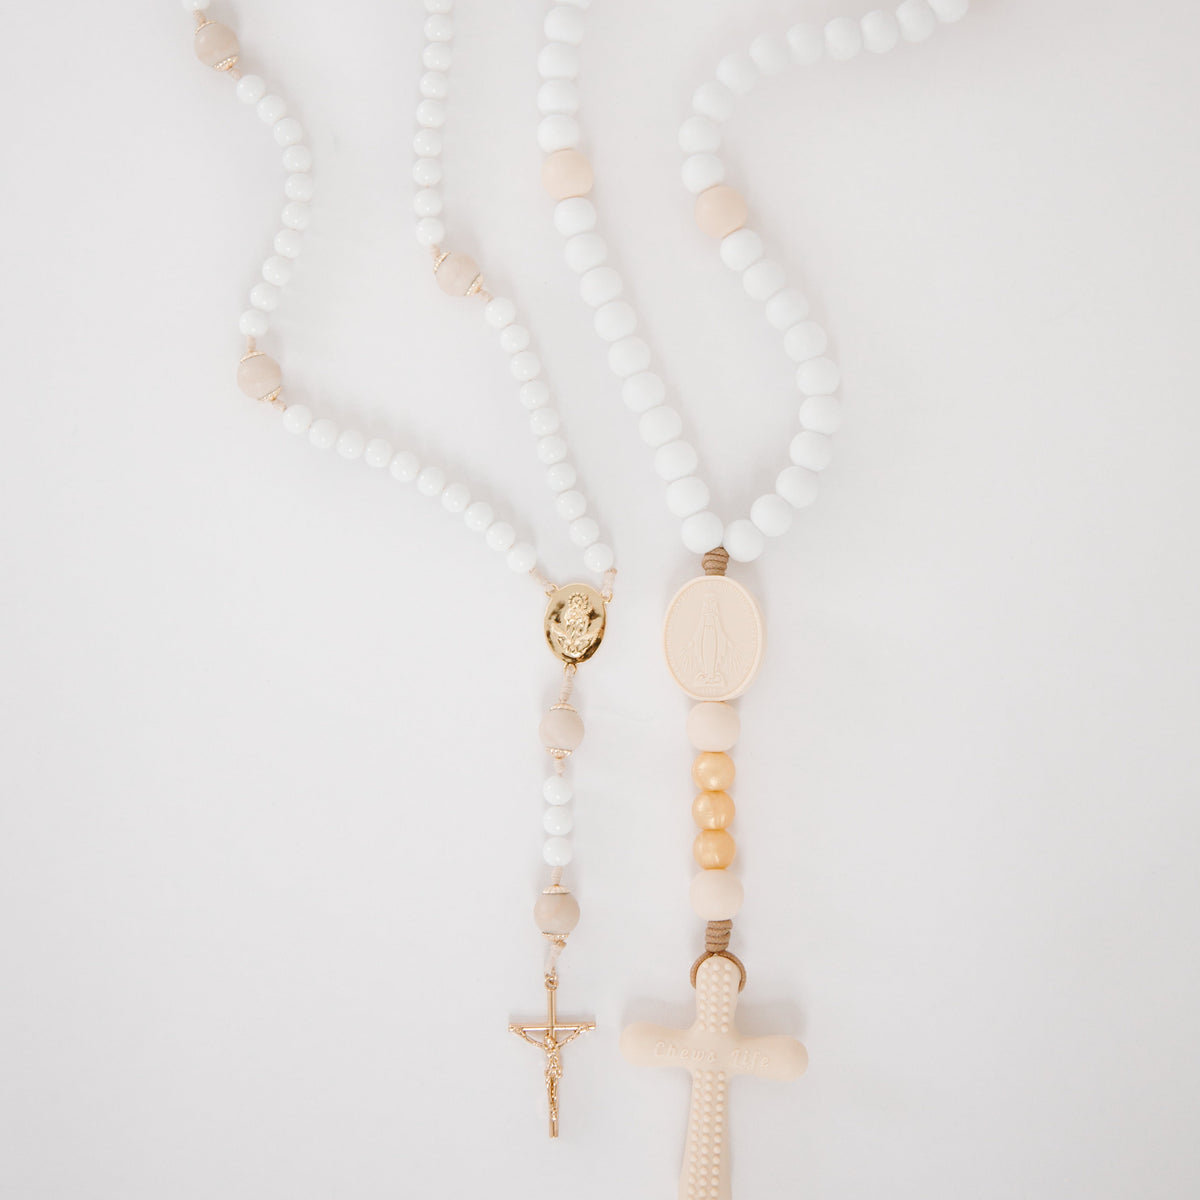 Queen of Angels | Mommy & Me Rosary Set | Chews Life x West Coast Catholic